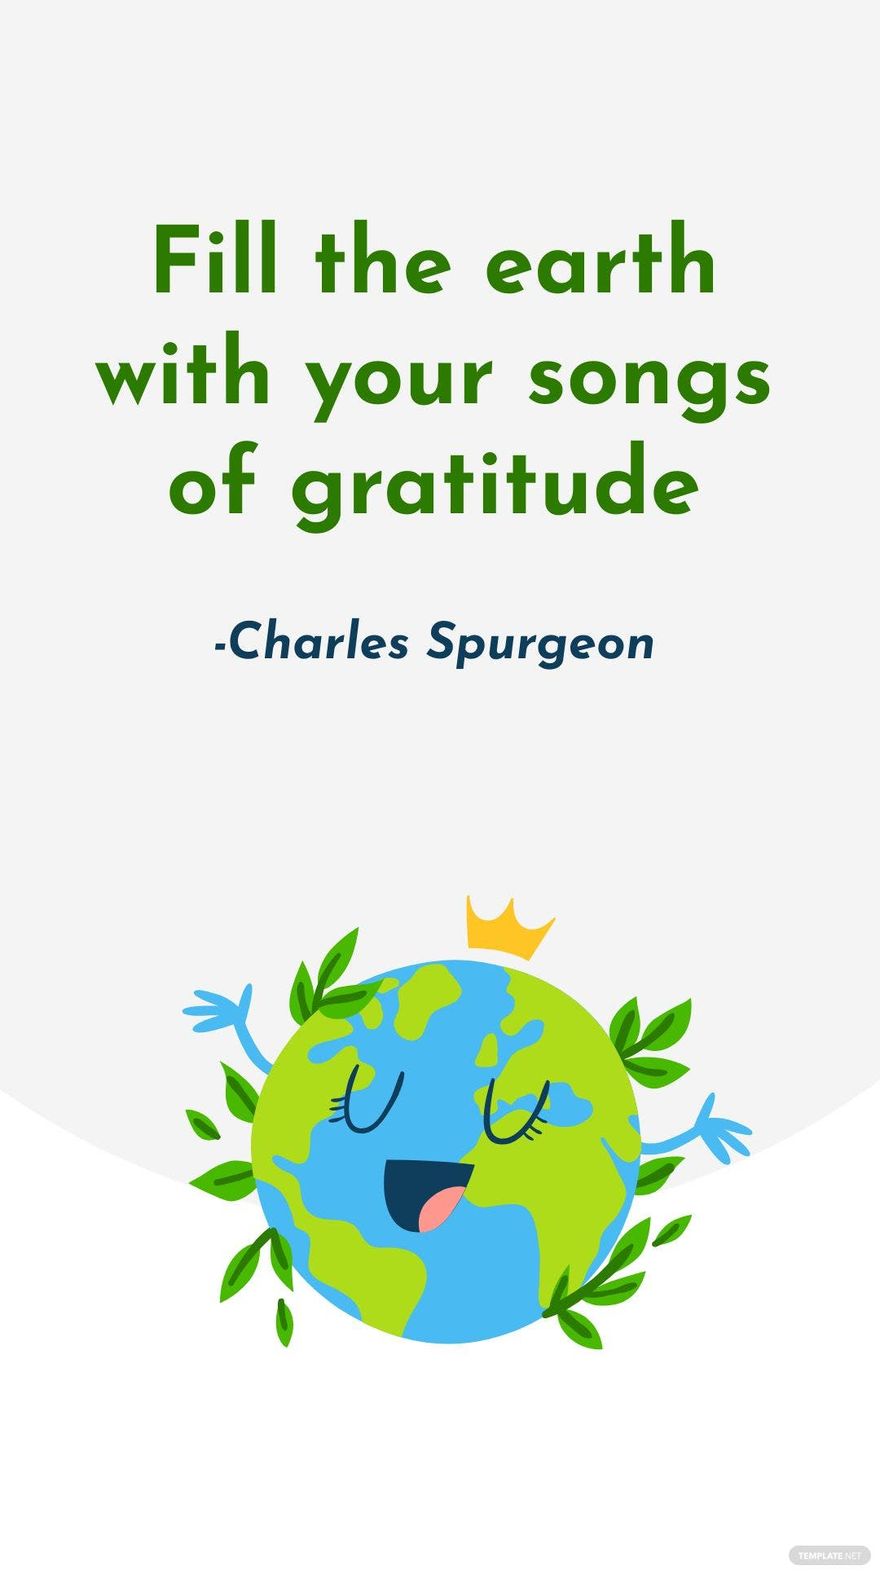 Charles Spurgeon - Fill the earth with your songs of gratitude in JPG